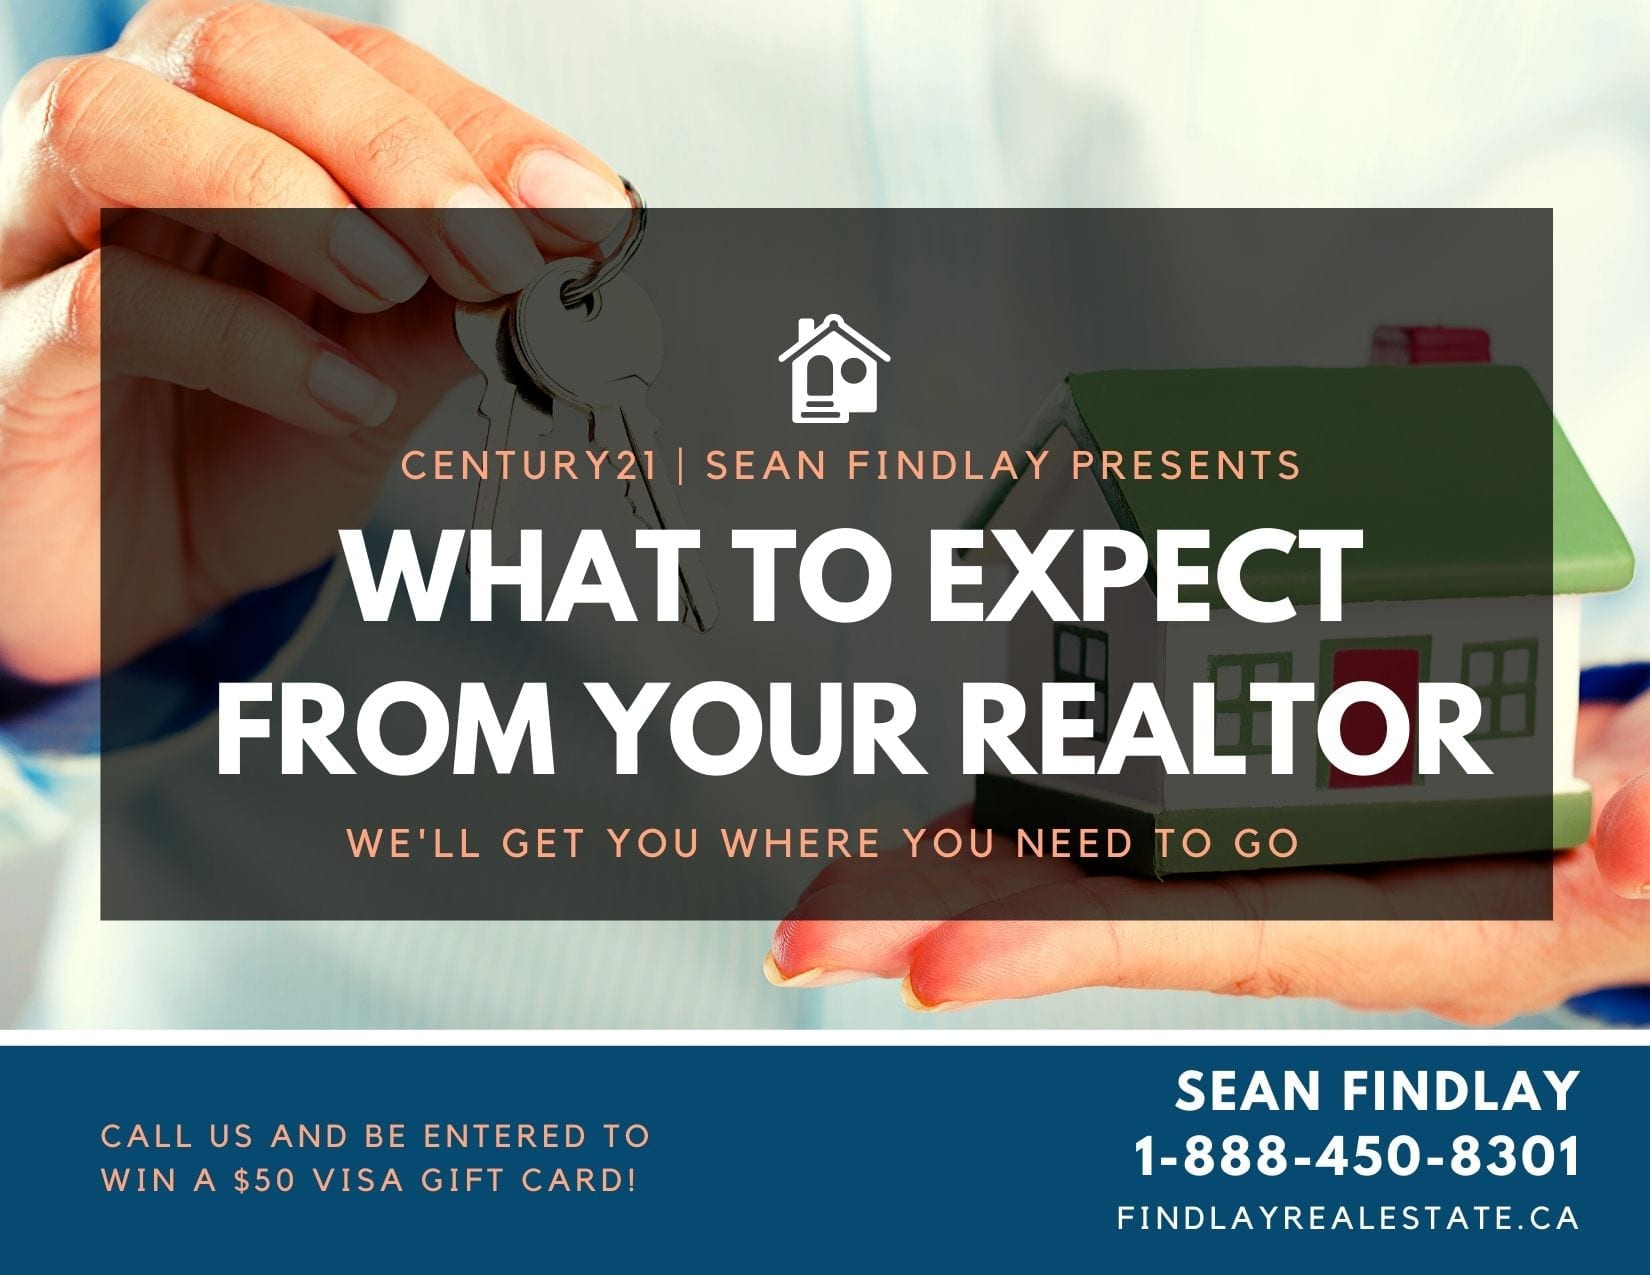 What-To-Expect-From-Your-Realtor-Toronto-StoneyCreek-Hamilton-Oakville-Burlington-Sell-Your-House-Home